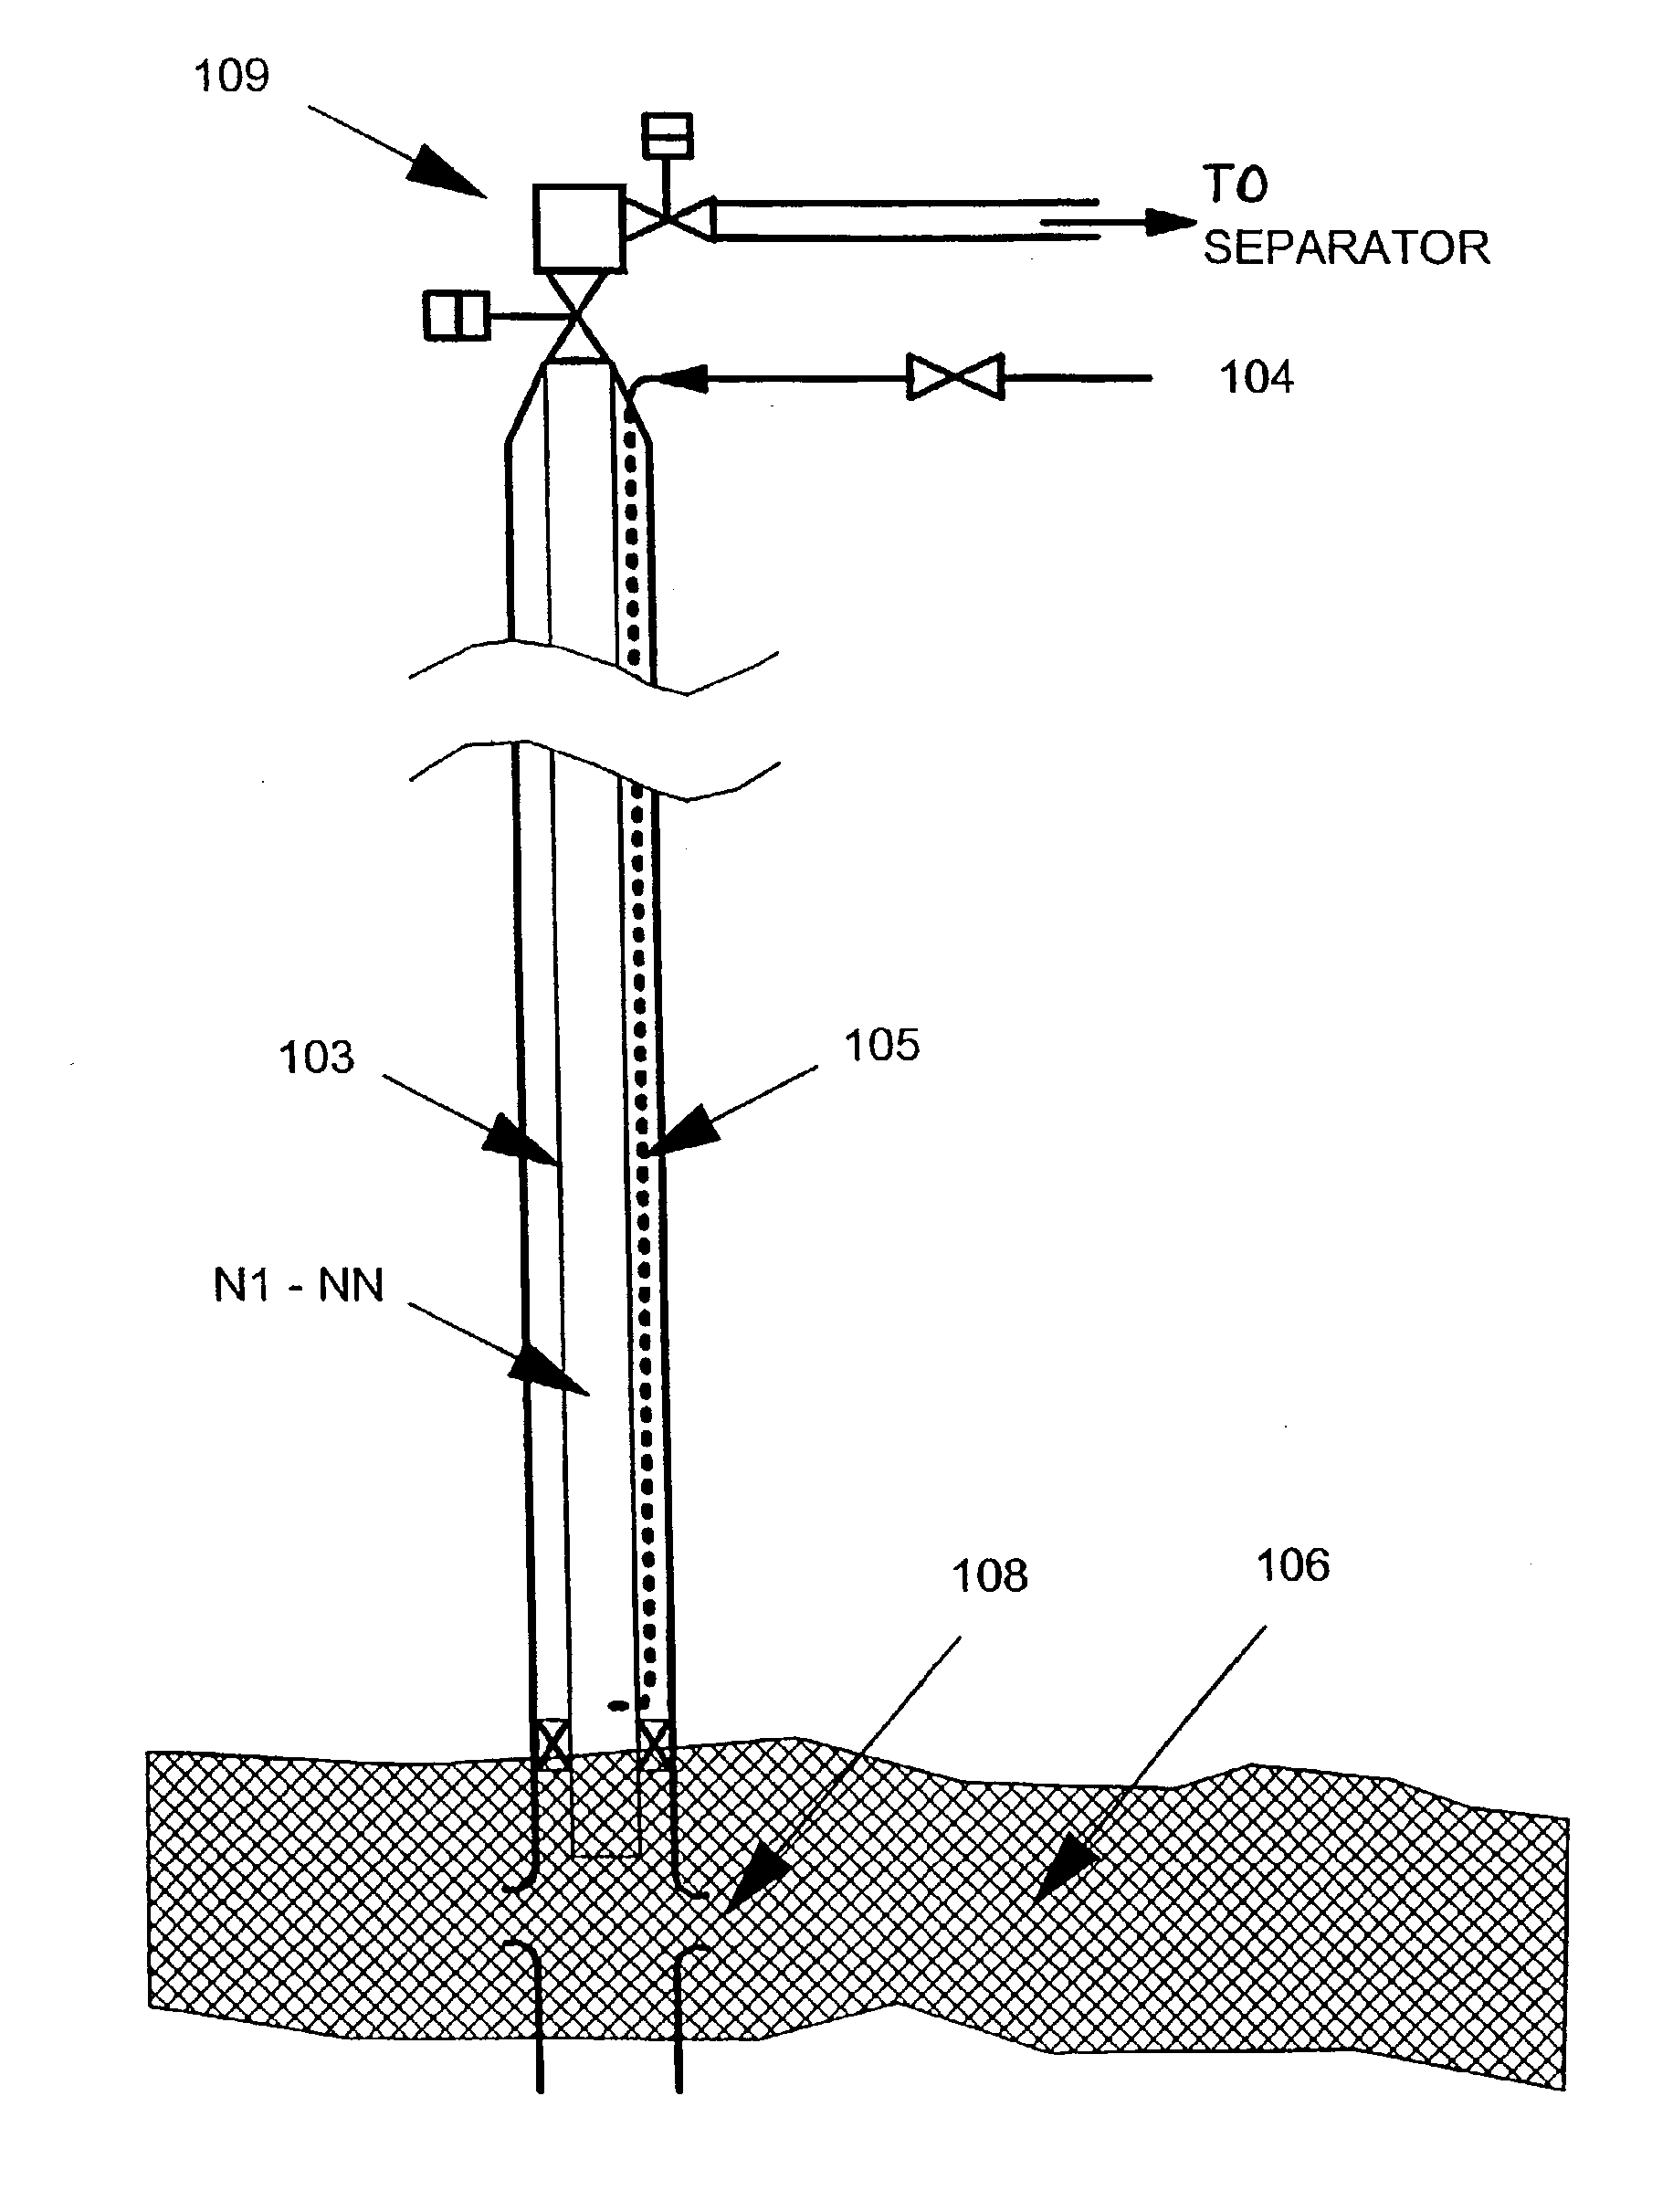 Method and system for gas-lifting well effluents